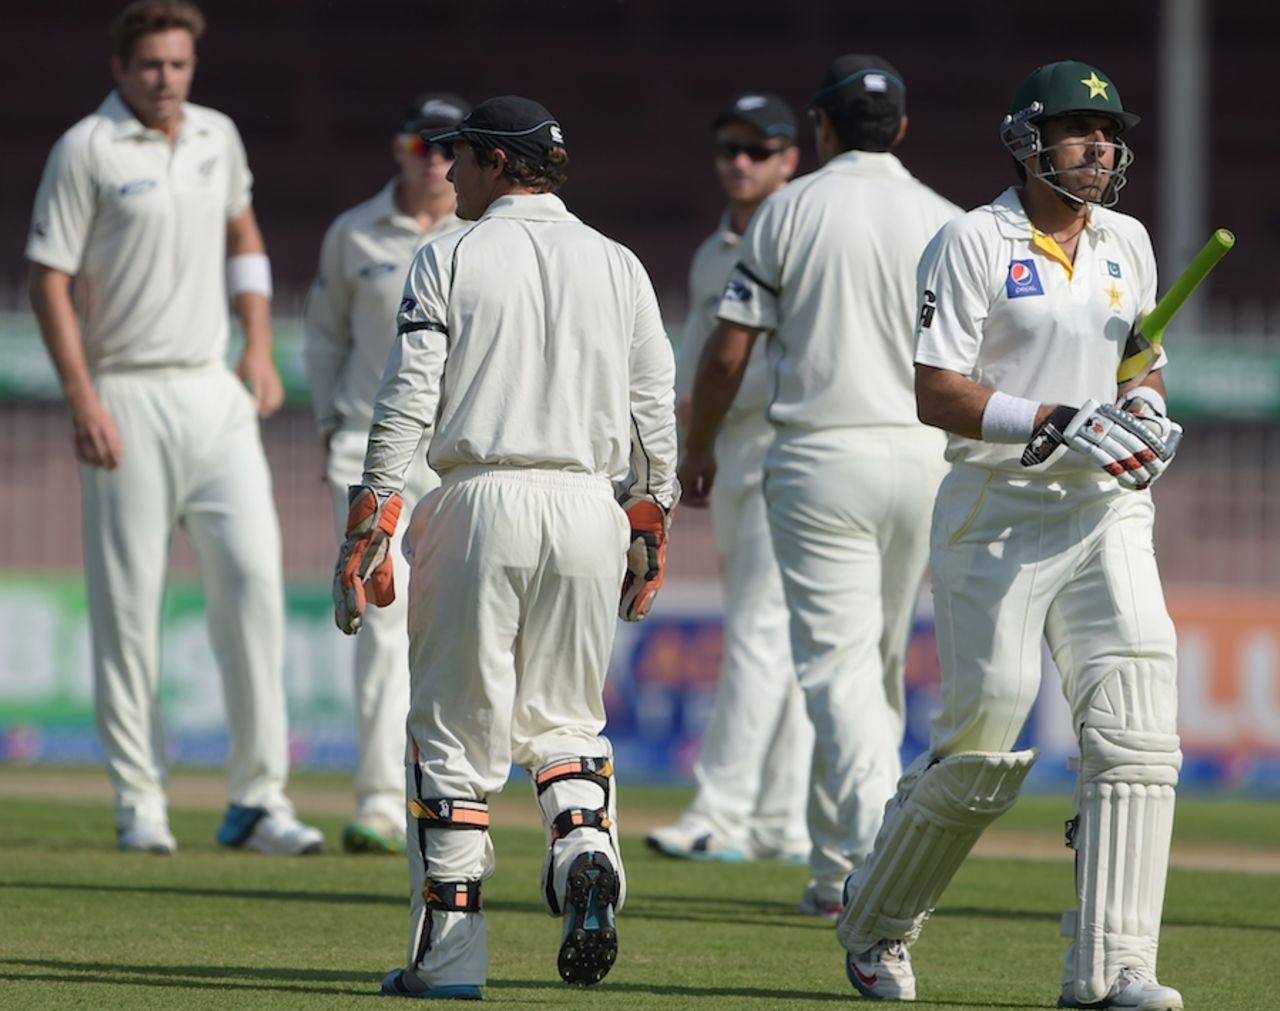 Misbah-ul-Haq failed to add to his overnight score, Pakistan v New Zealand, 3rd Test, Sharjah, 2nd day, November 28, 2014